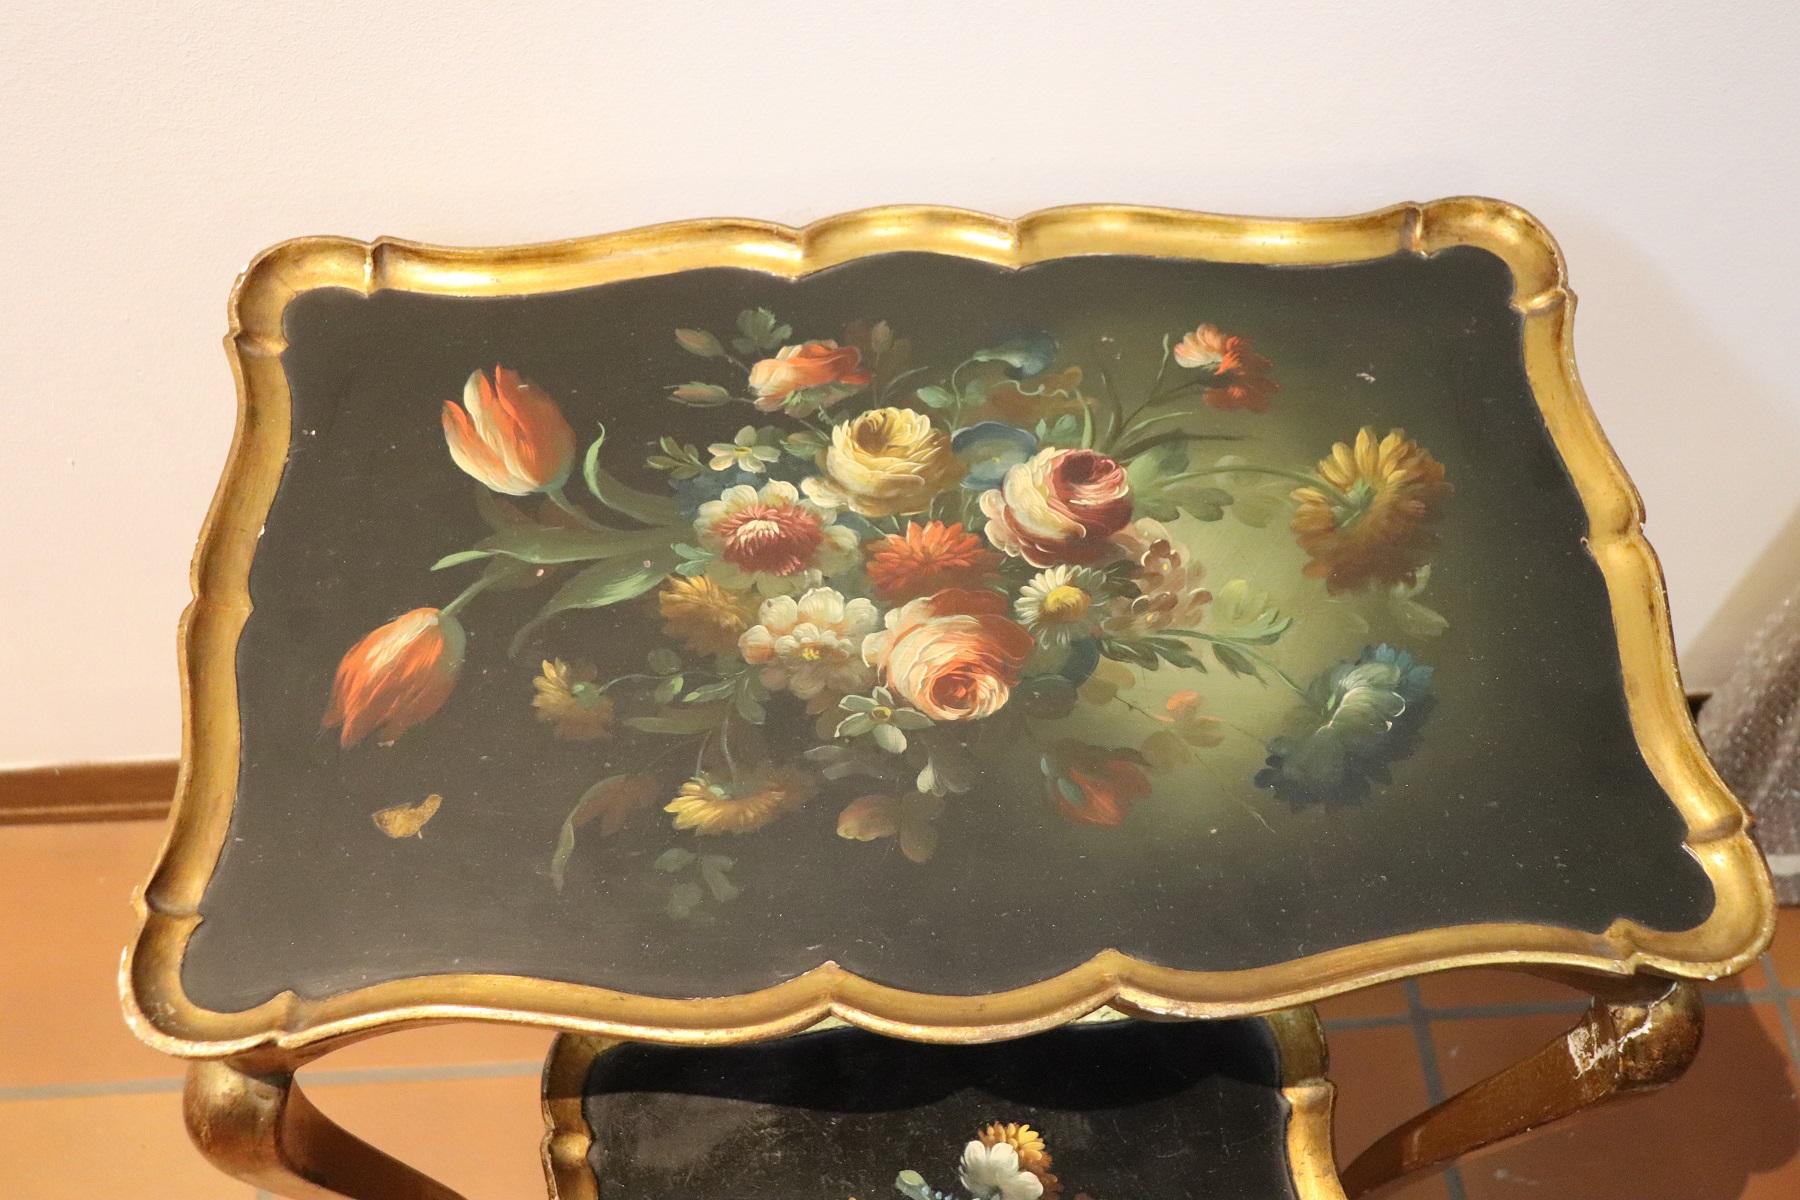 Rare and fine quality Italian Louis XV style, 1930s two side tables or sofa tables. The tables has a particular legs slender. Fine hand painted decoration with floral taste. Painting of great pictorial quality. The legs are golden with gold leaf.